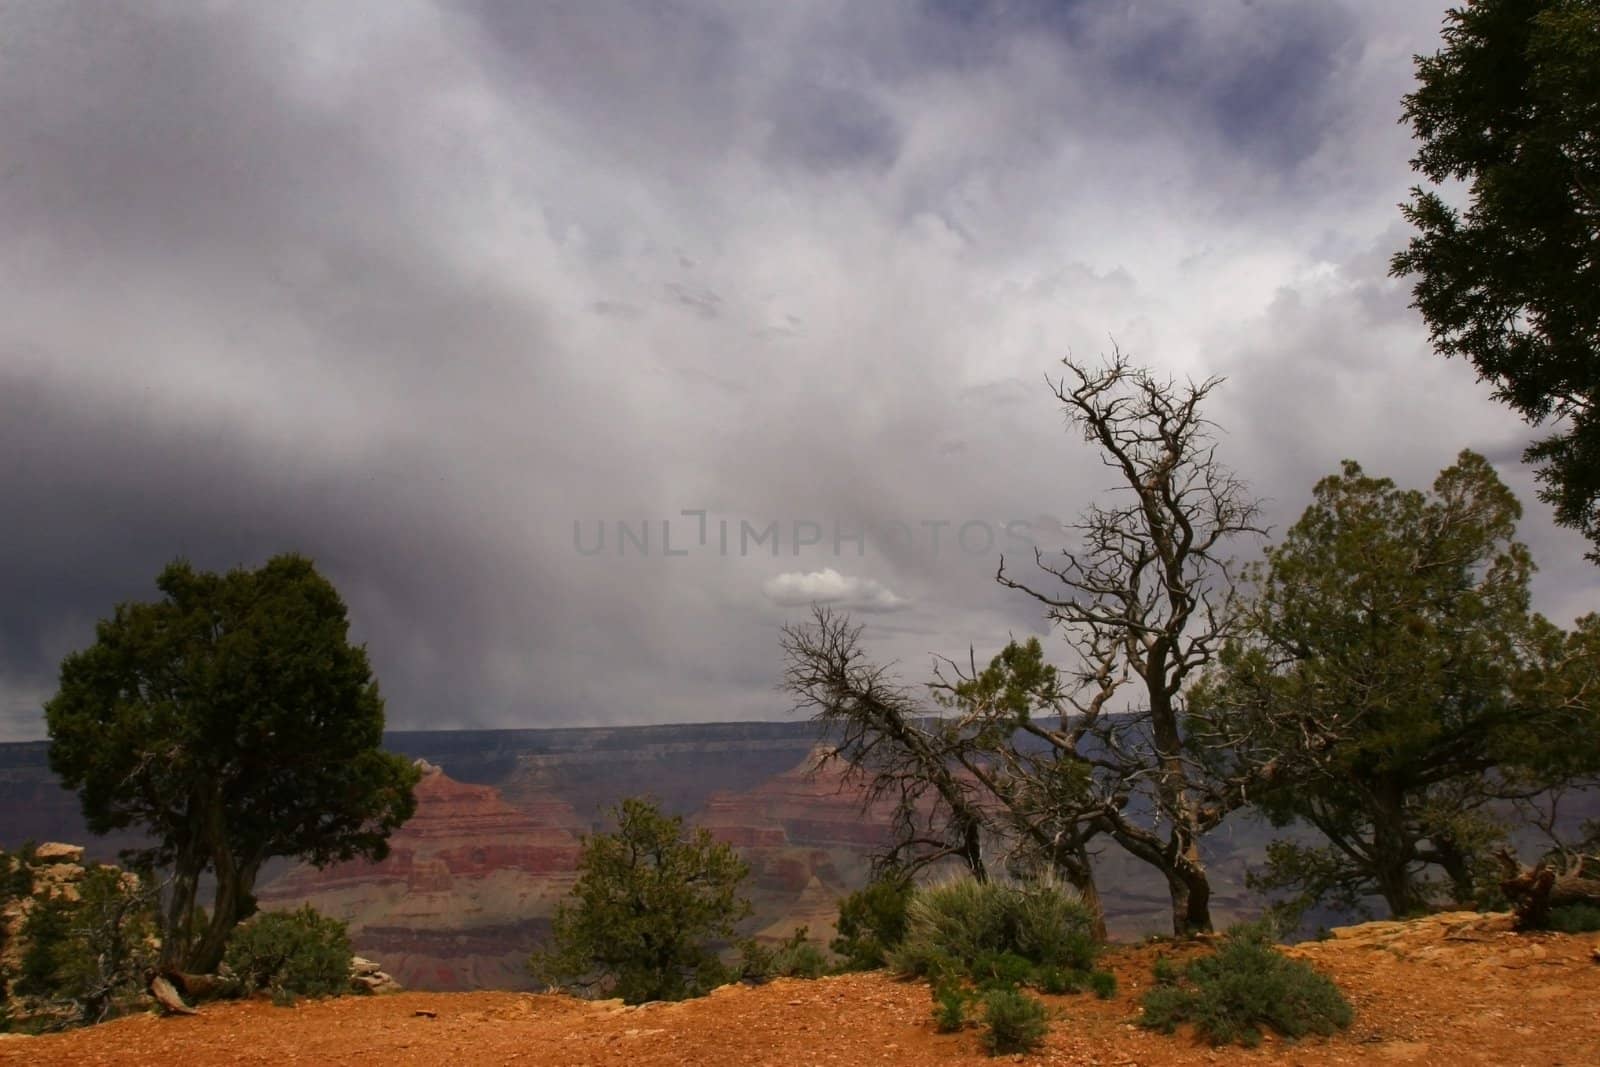 Stormy Grand Canyon by Auldwhispers